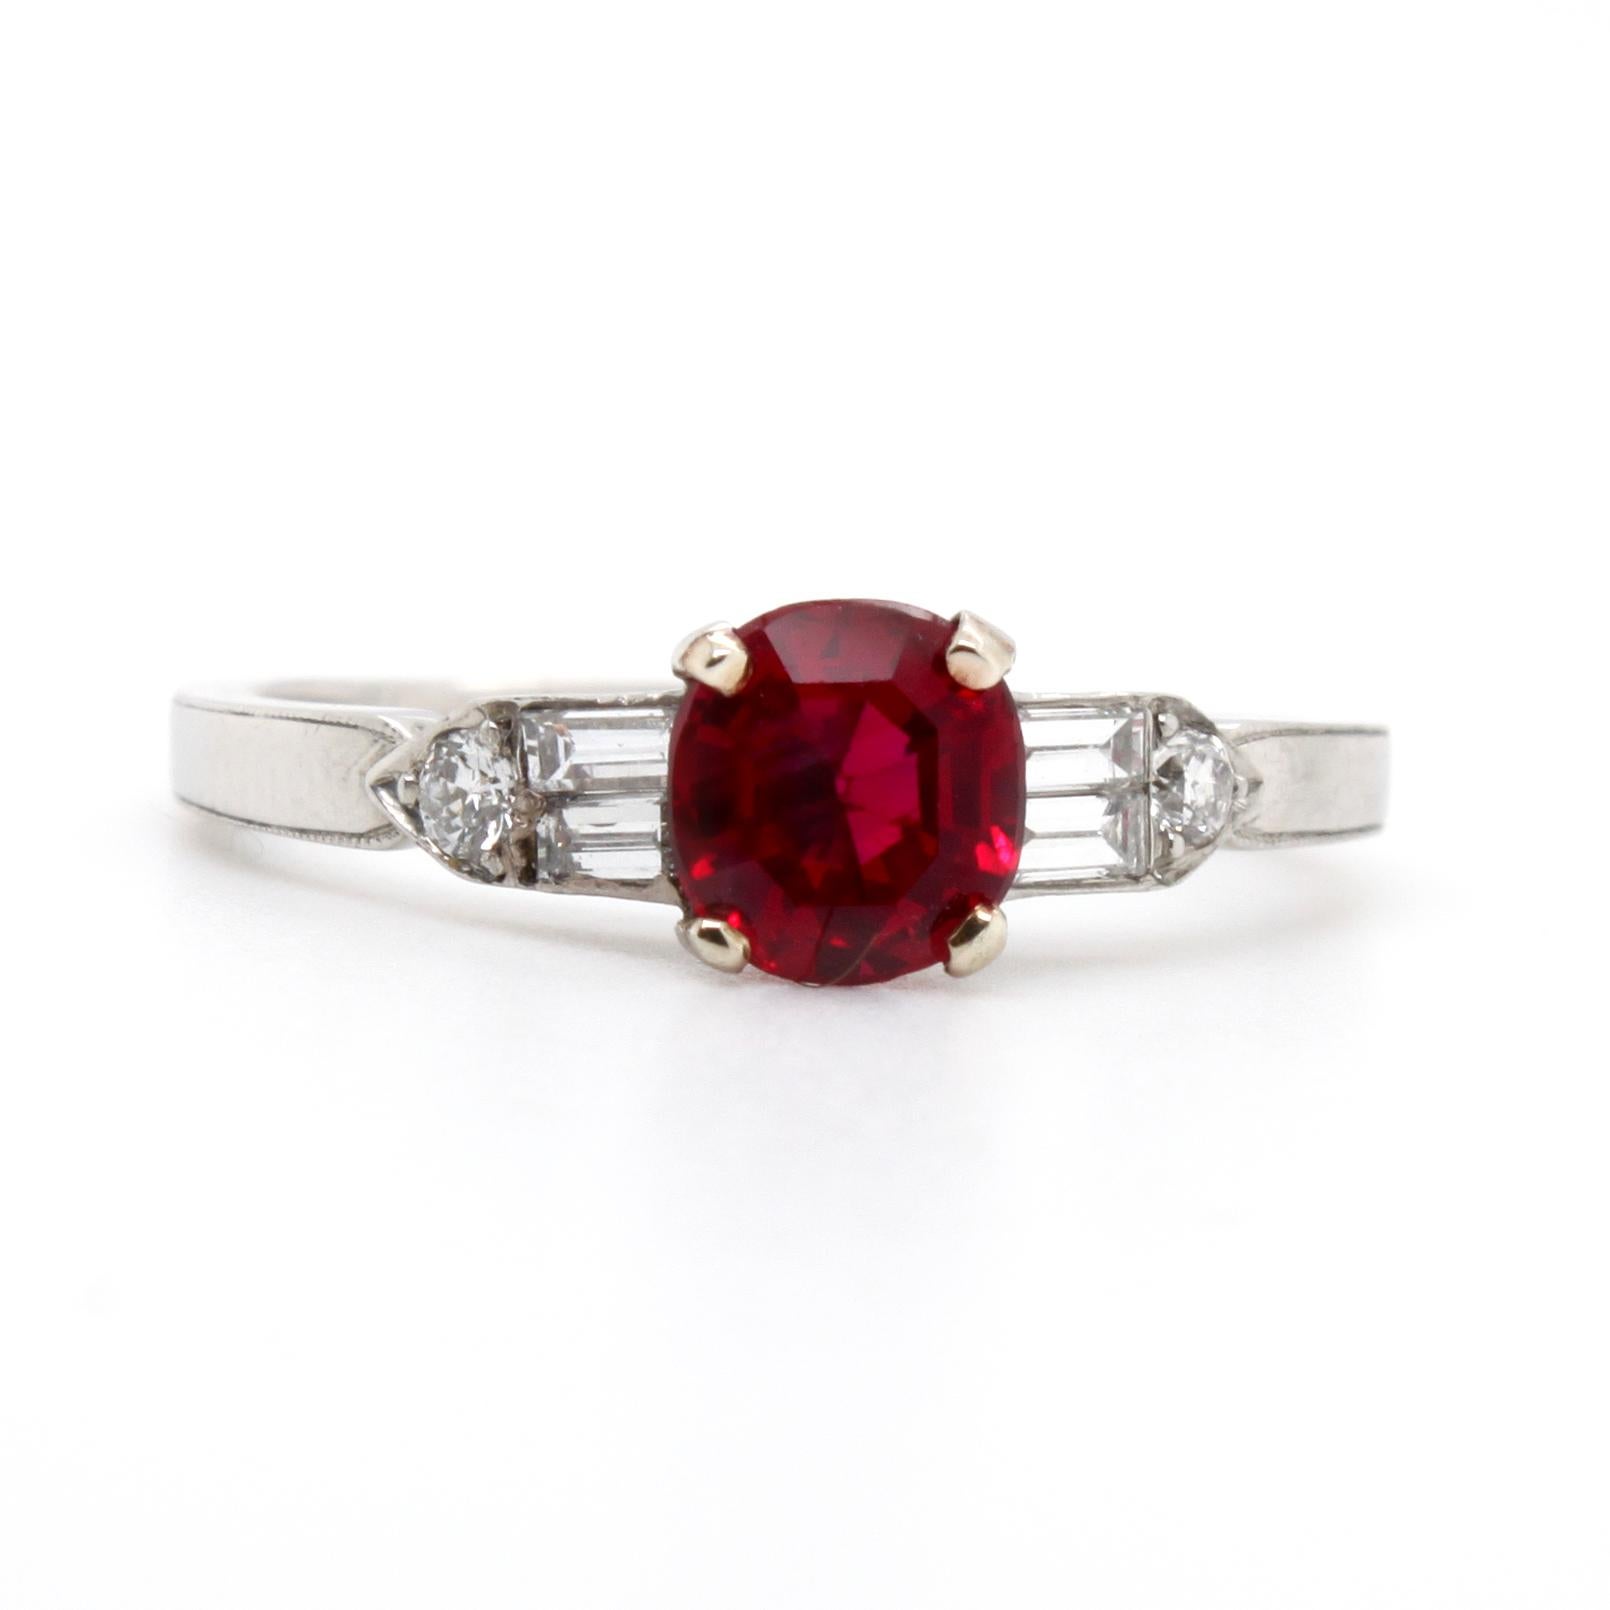 Rare Pigeon Blood Color 0.82ct Natural Burmese Ruby and Diamond Ring, ca. 1920s

A beautiful and rare 